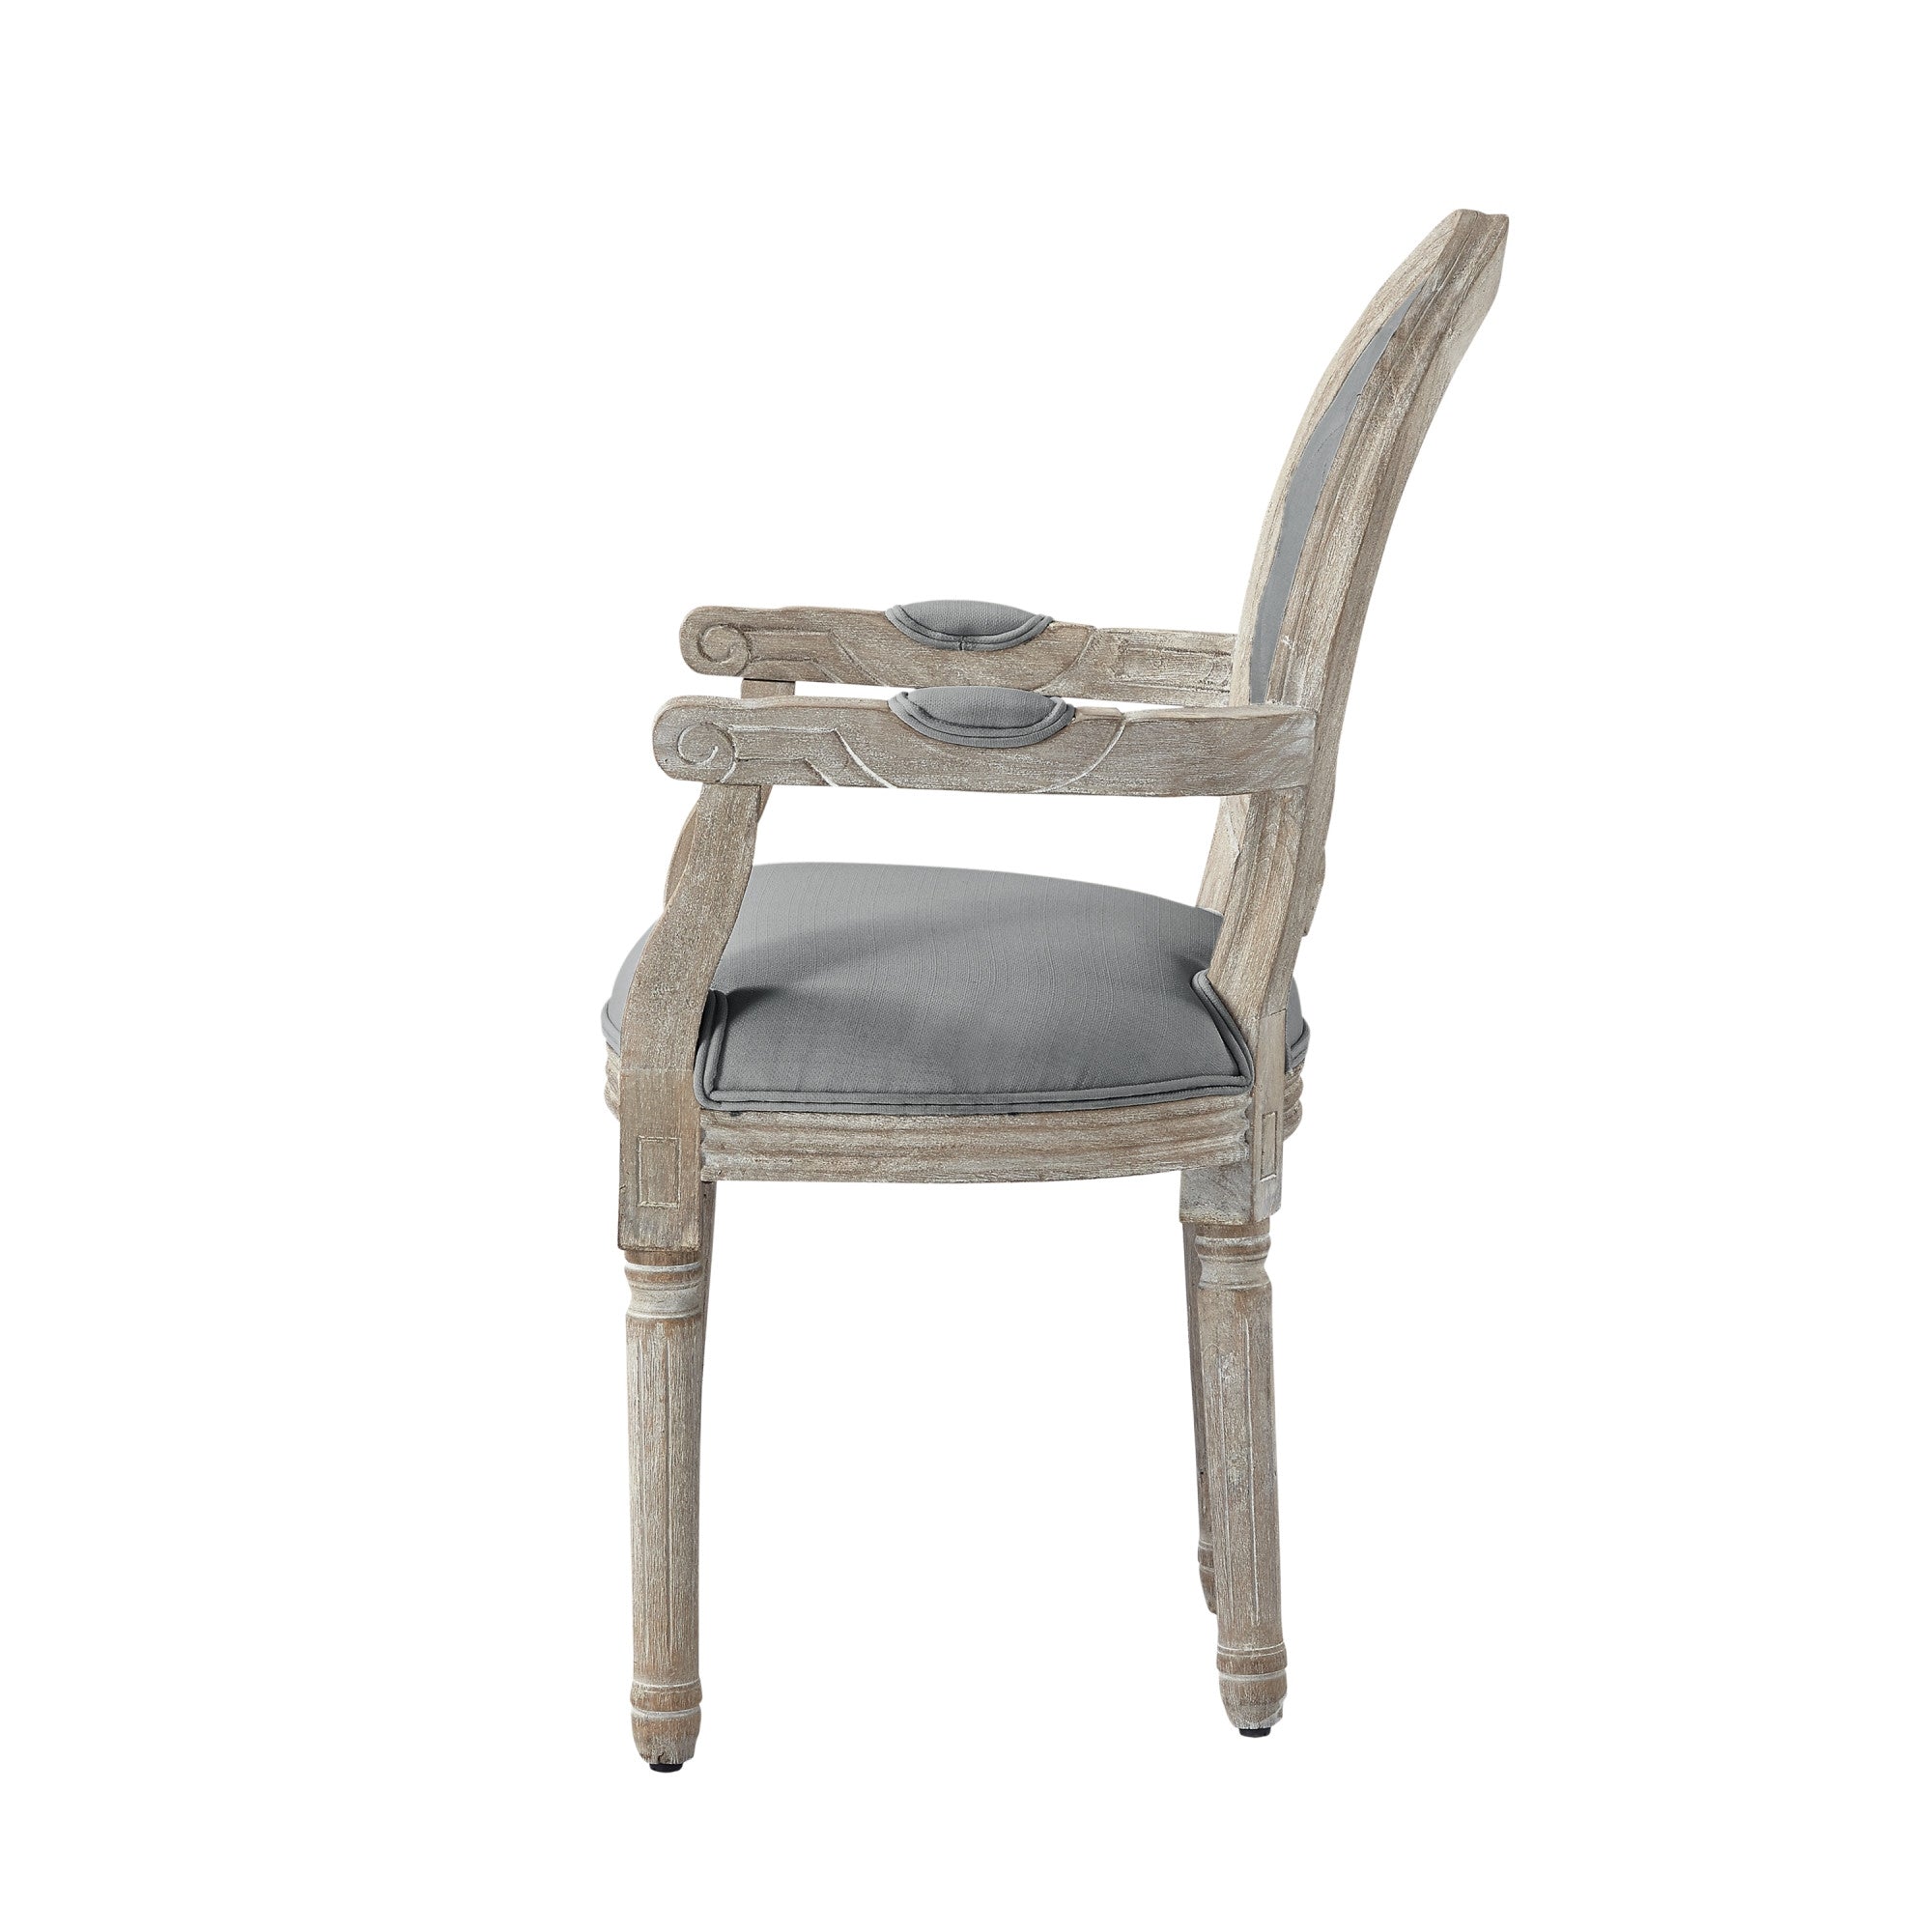 Tufted Cream and Brown Upholstered Linen Dining Arm Chair